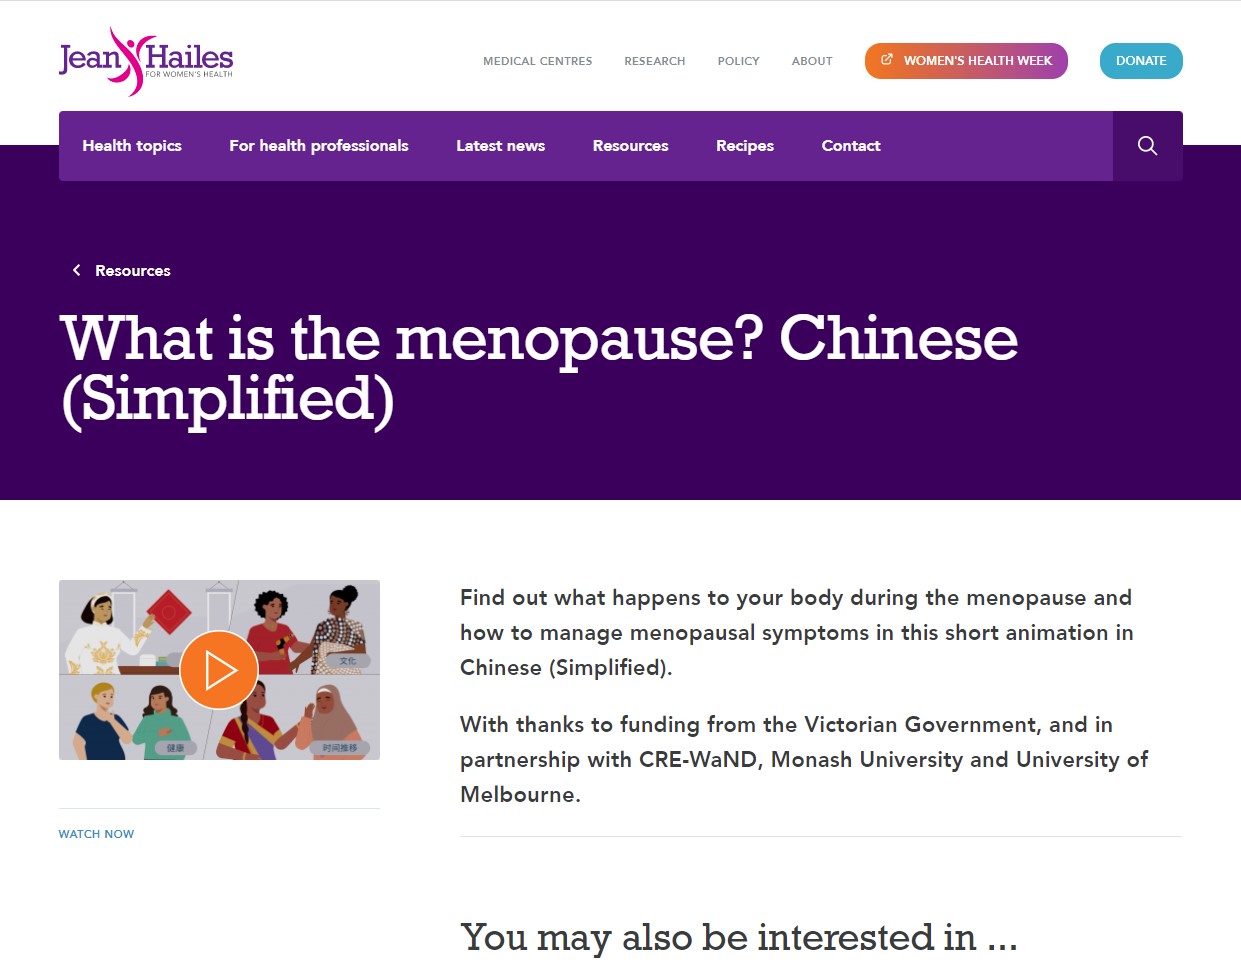 Jean Hailes - What is the menopause? (Chinese) thumbnail